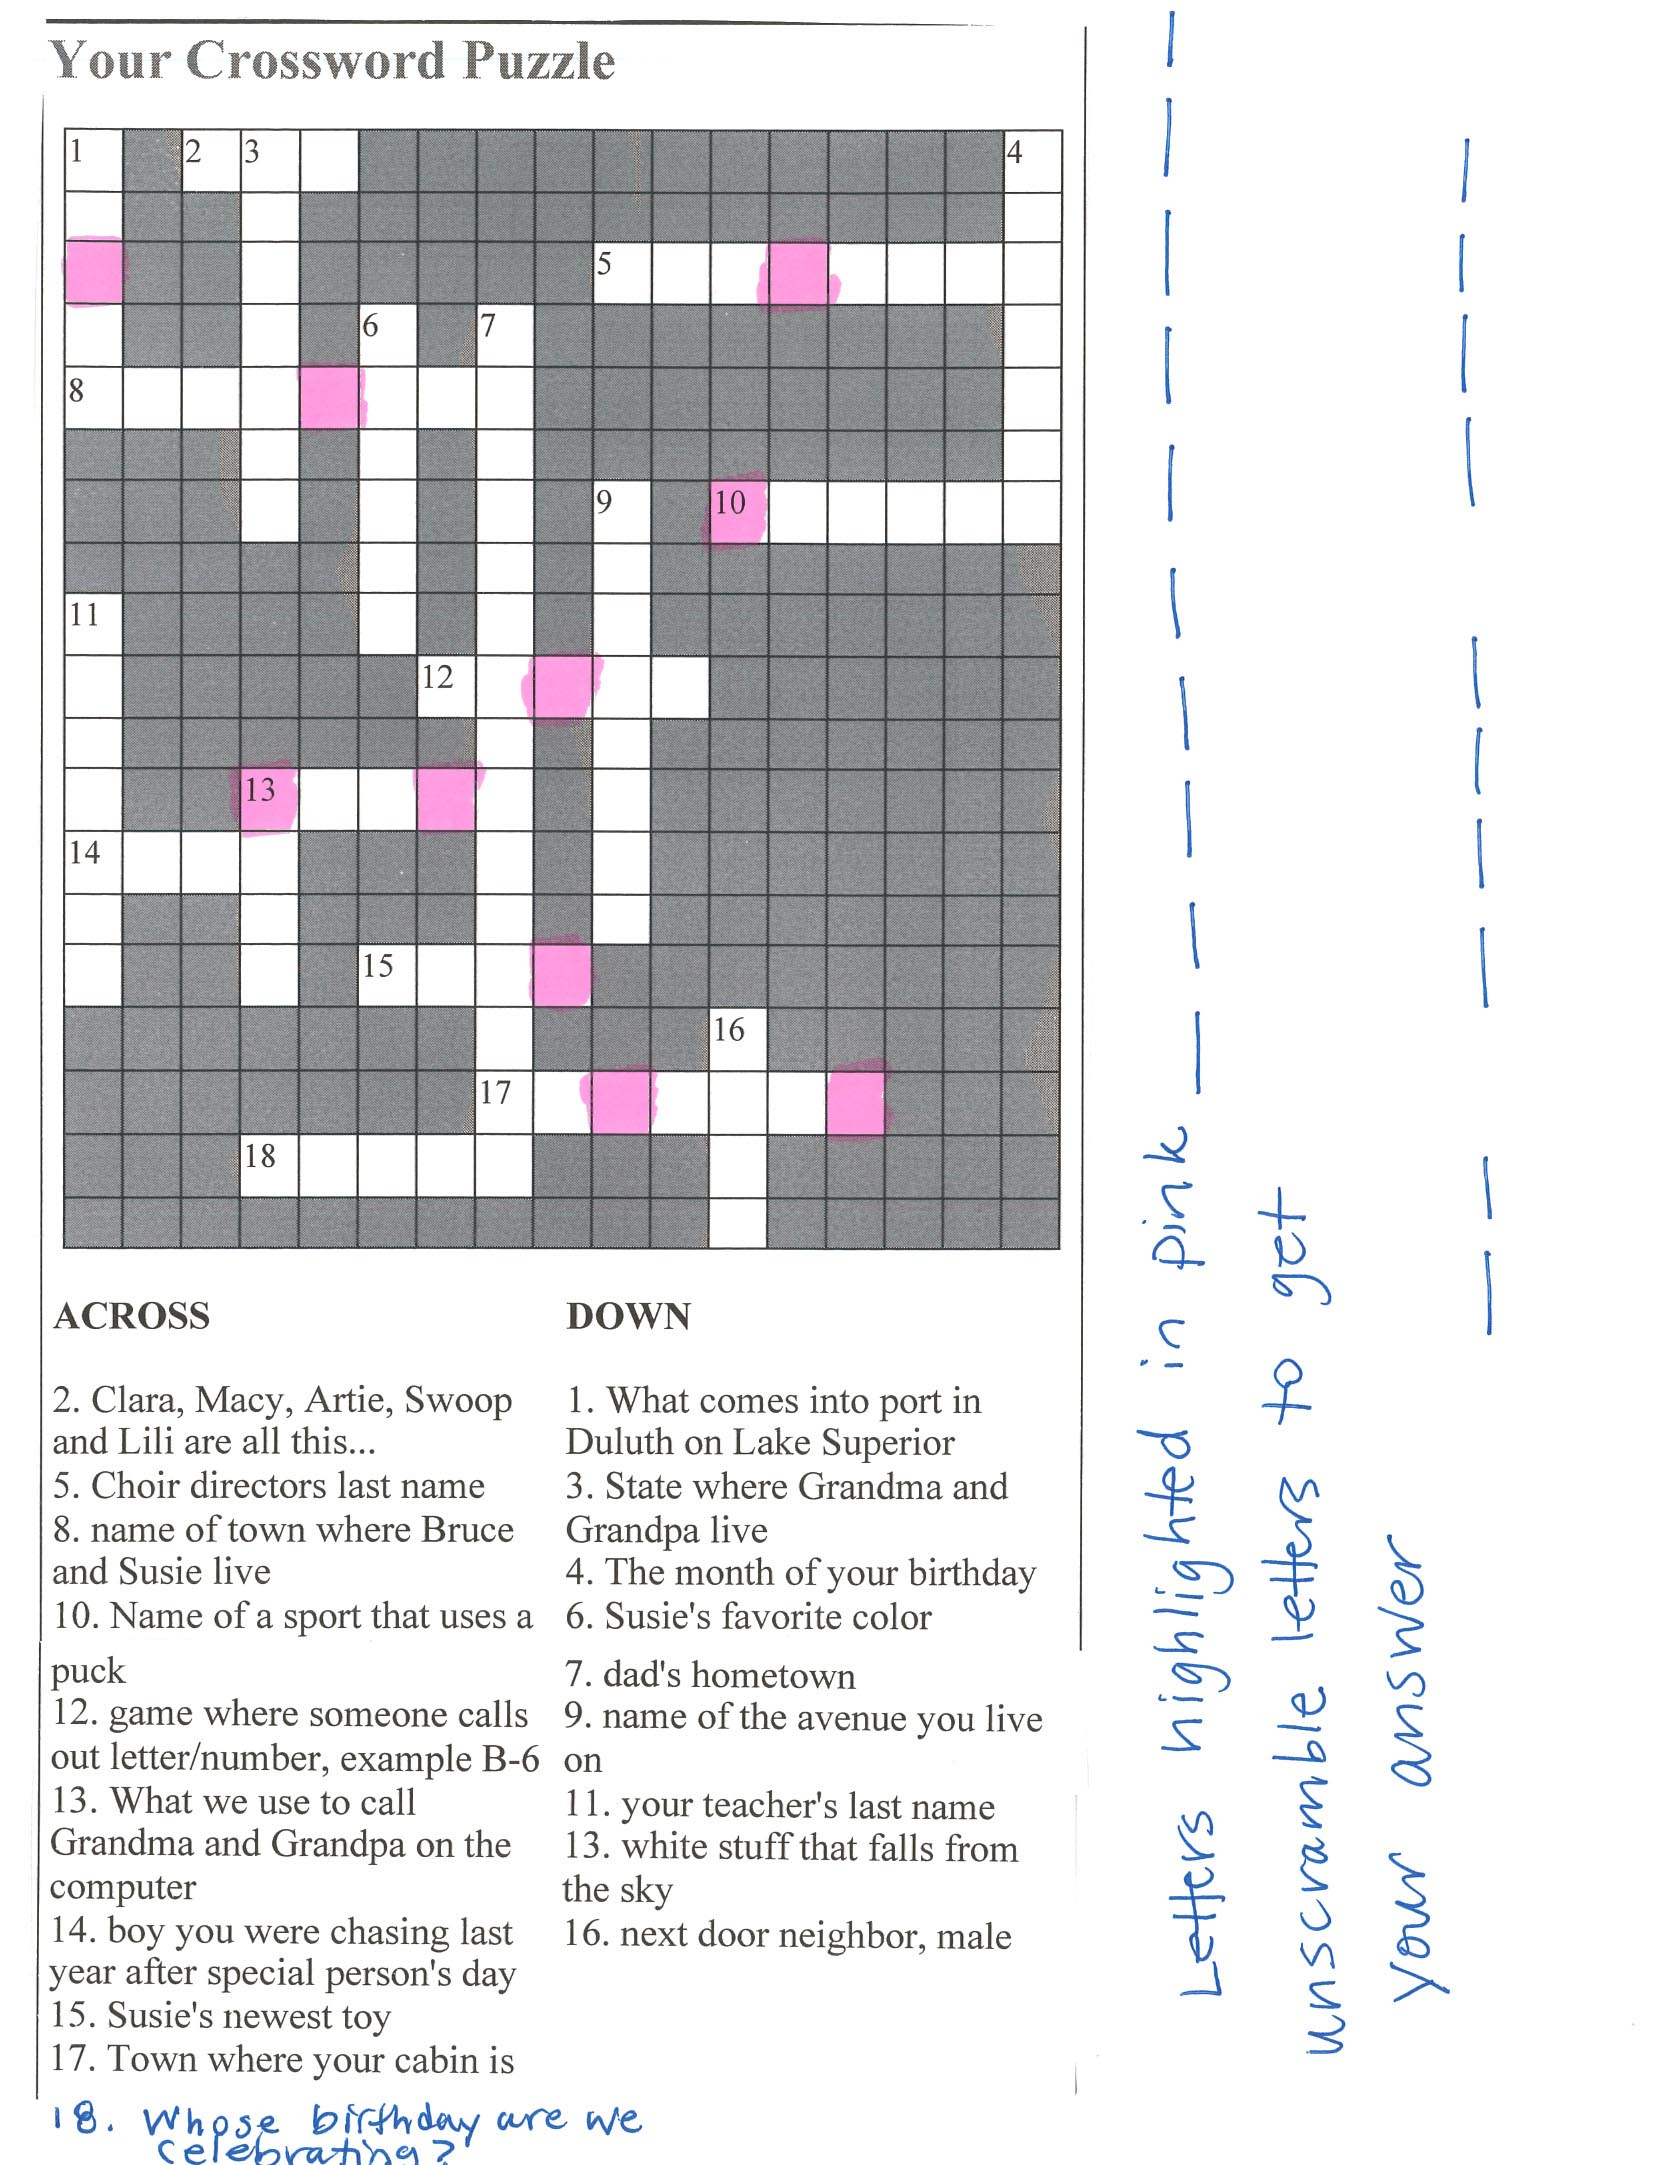 Bridal Shower Crossword Puzzle Maker - Create Your Own Crossword Puzzle Free Printable